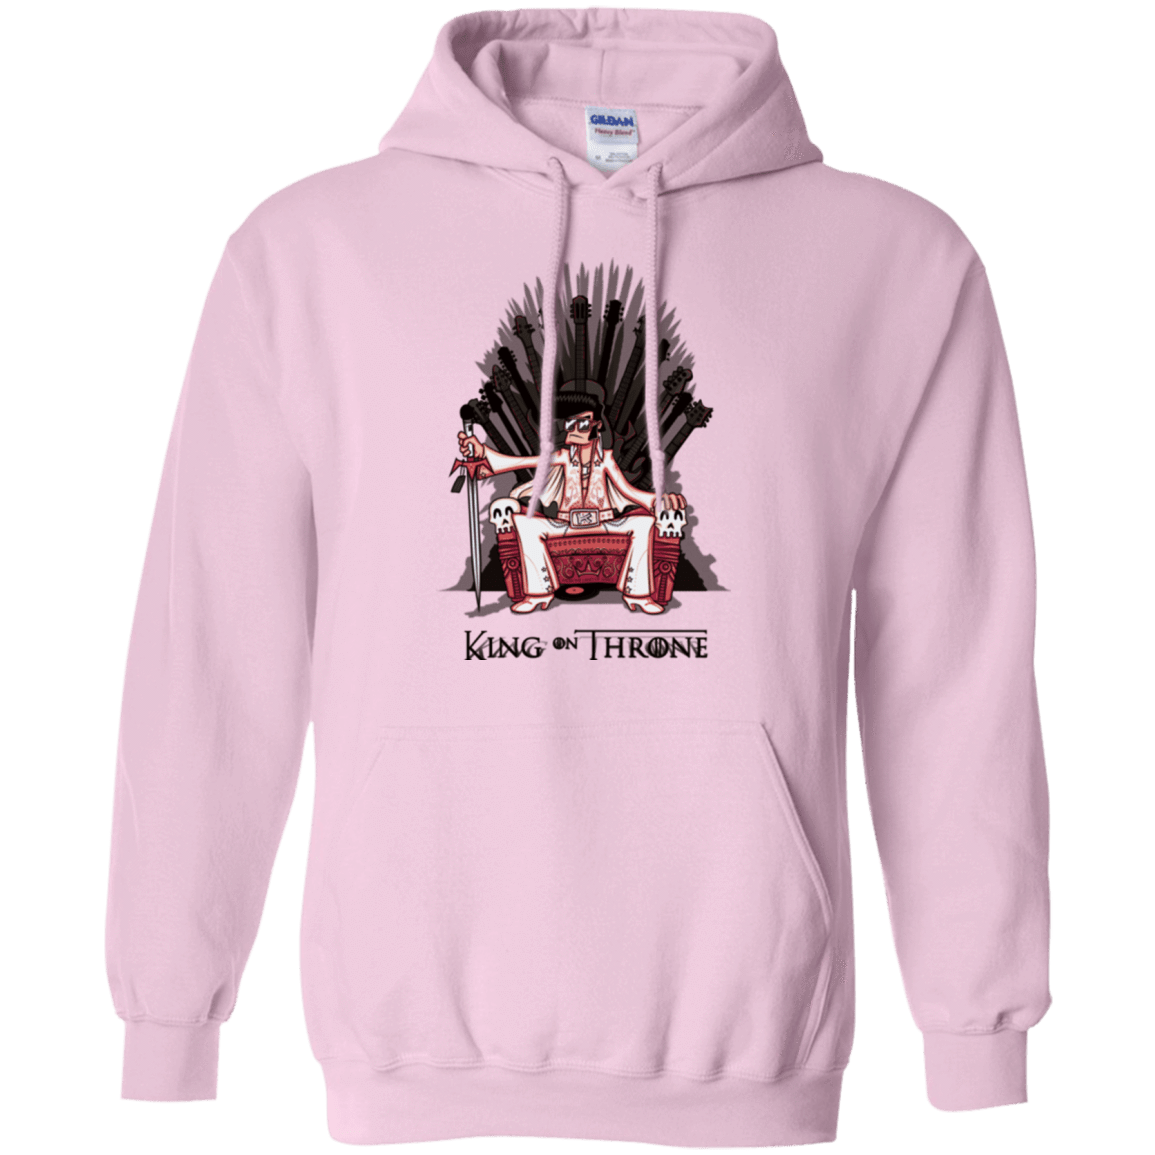 Sweatshirts Light Pink / Small King on Throne Pullover Hoodie